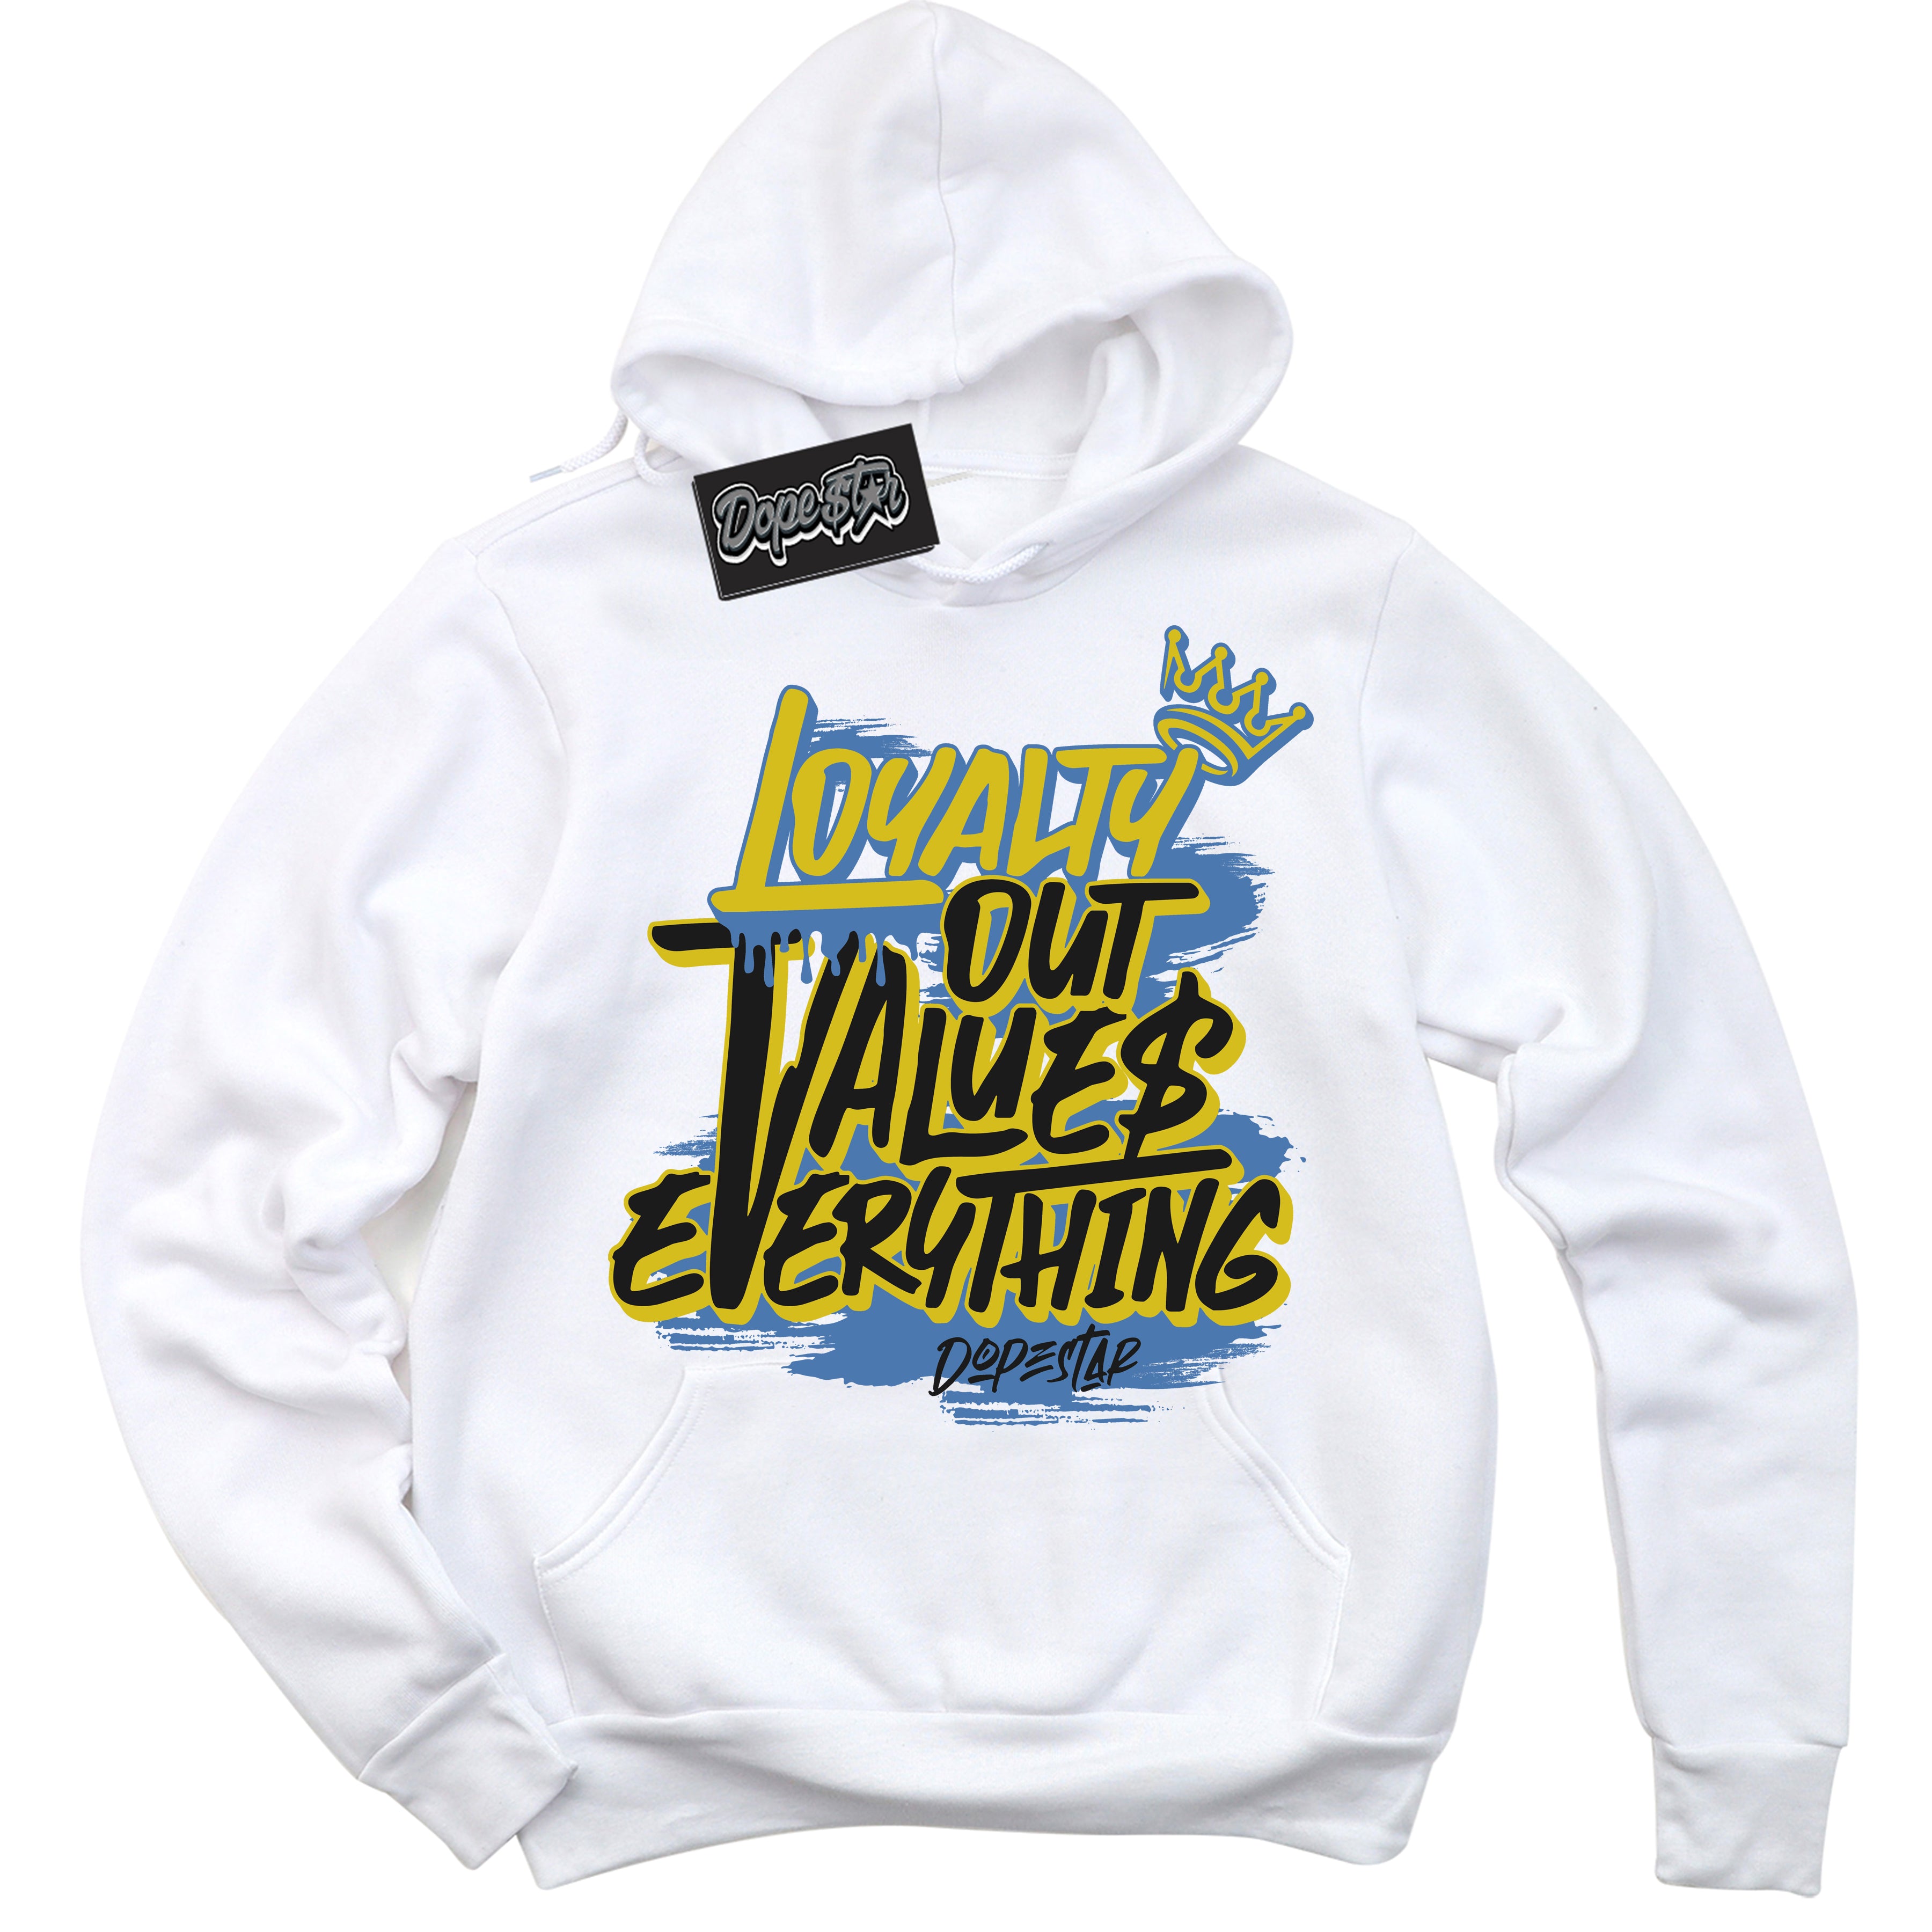 Cool White Hoodie with “ Loyalty Out Values Everything ”  design that Perfectly Matches Pro x Powerpuff Girls Bubbles Sneakers.